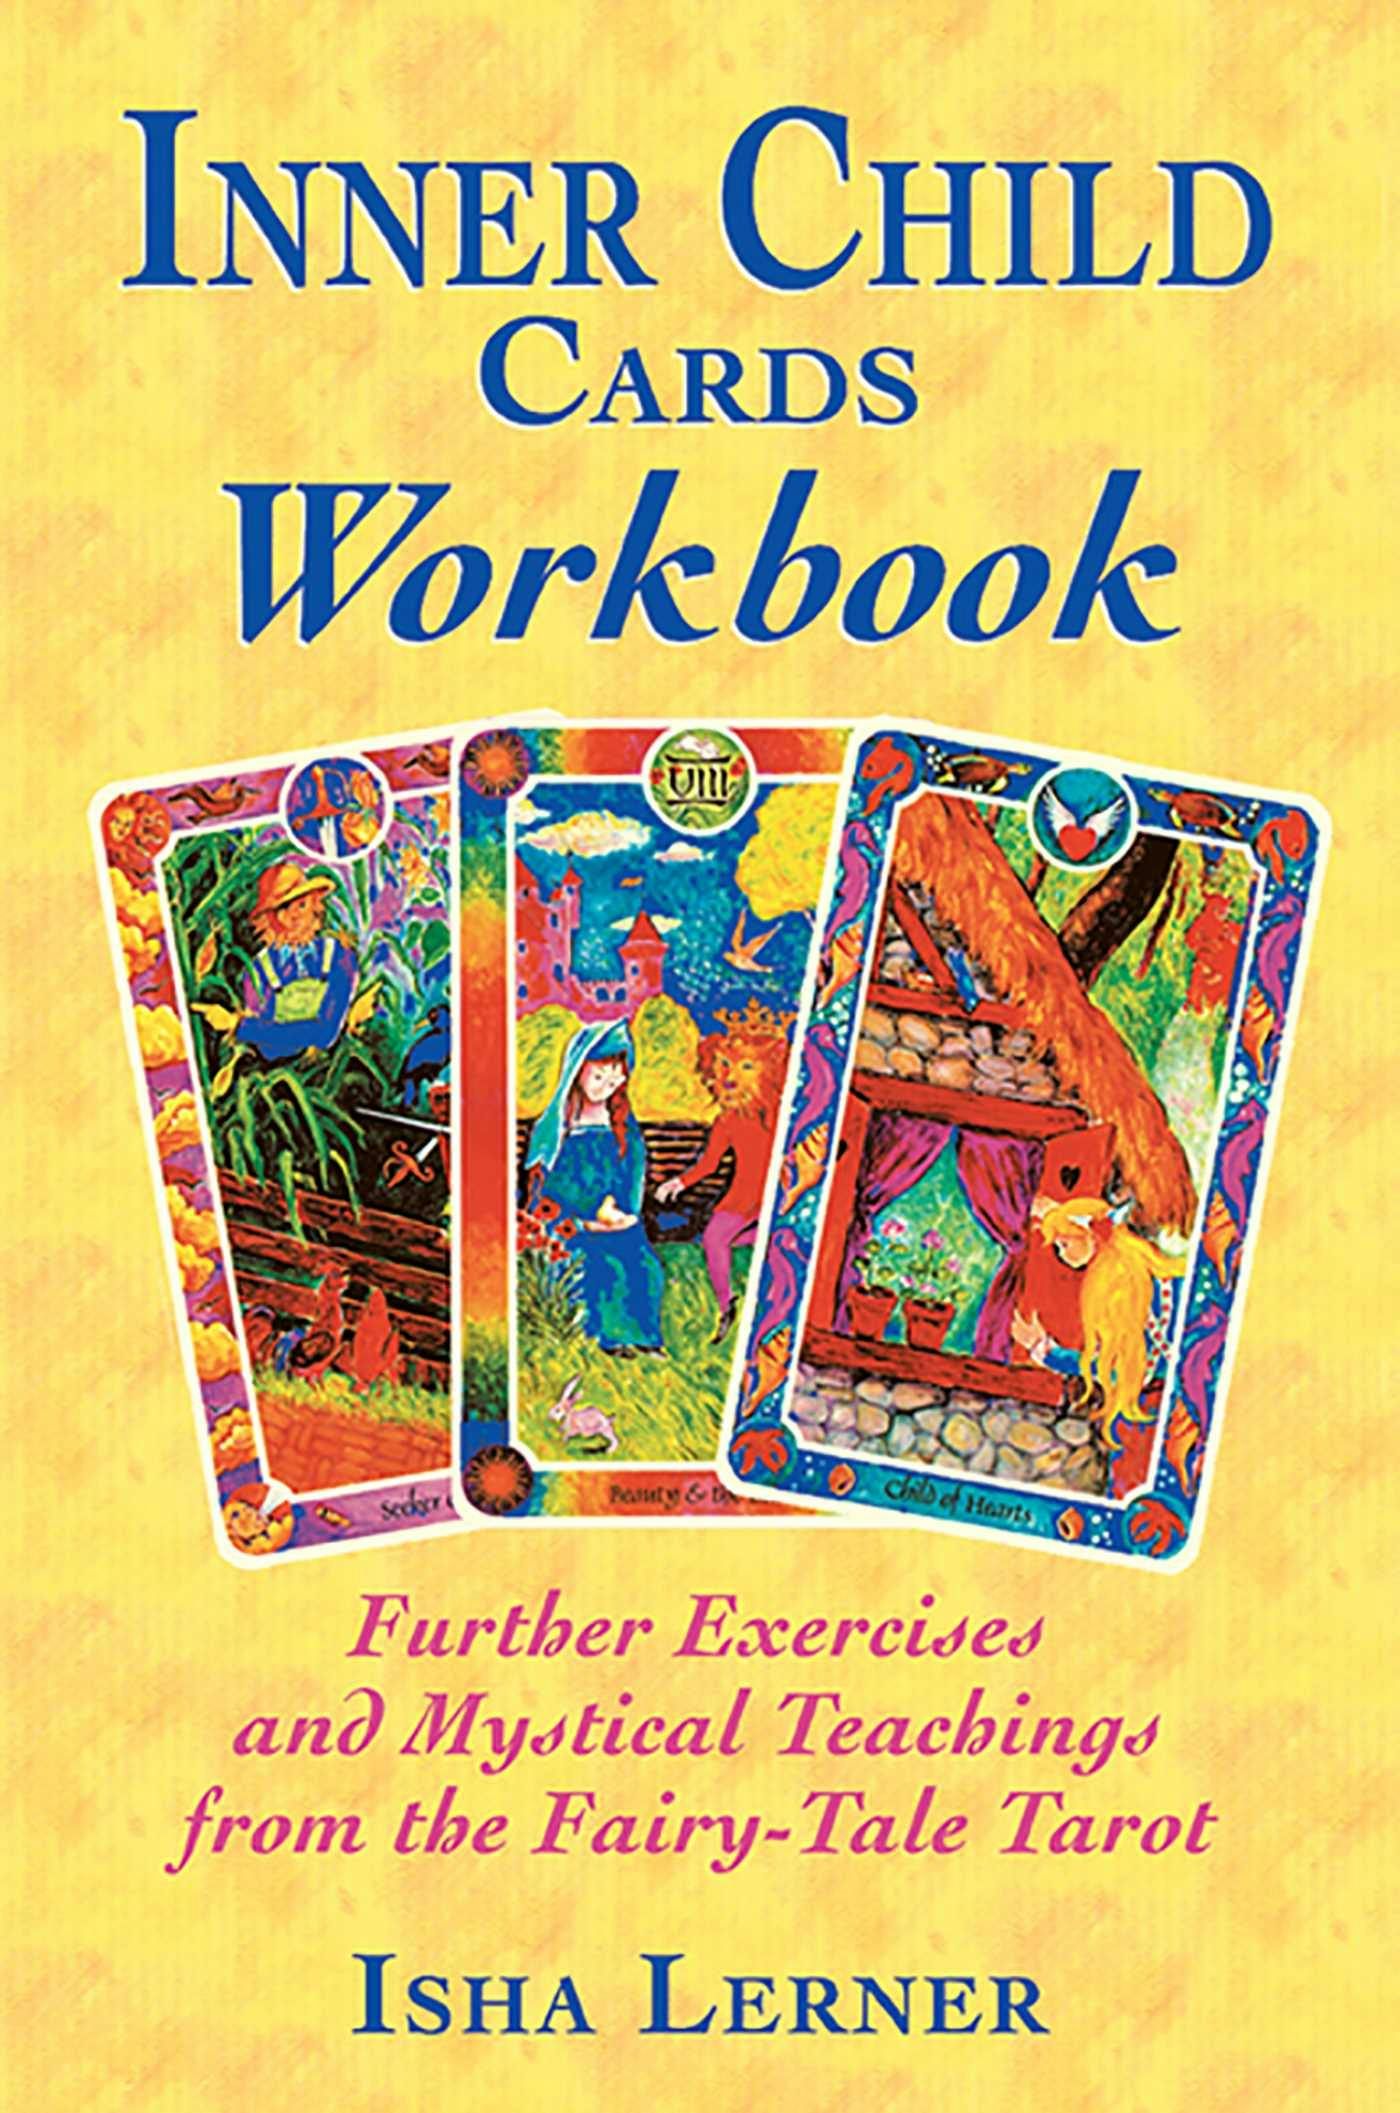 Inner Child Cards Workbook: Further Exercises and Mystical Teachings from the Fairy-Tale Tarot - undefined